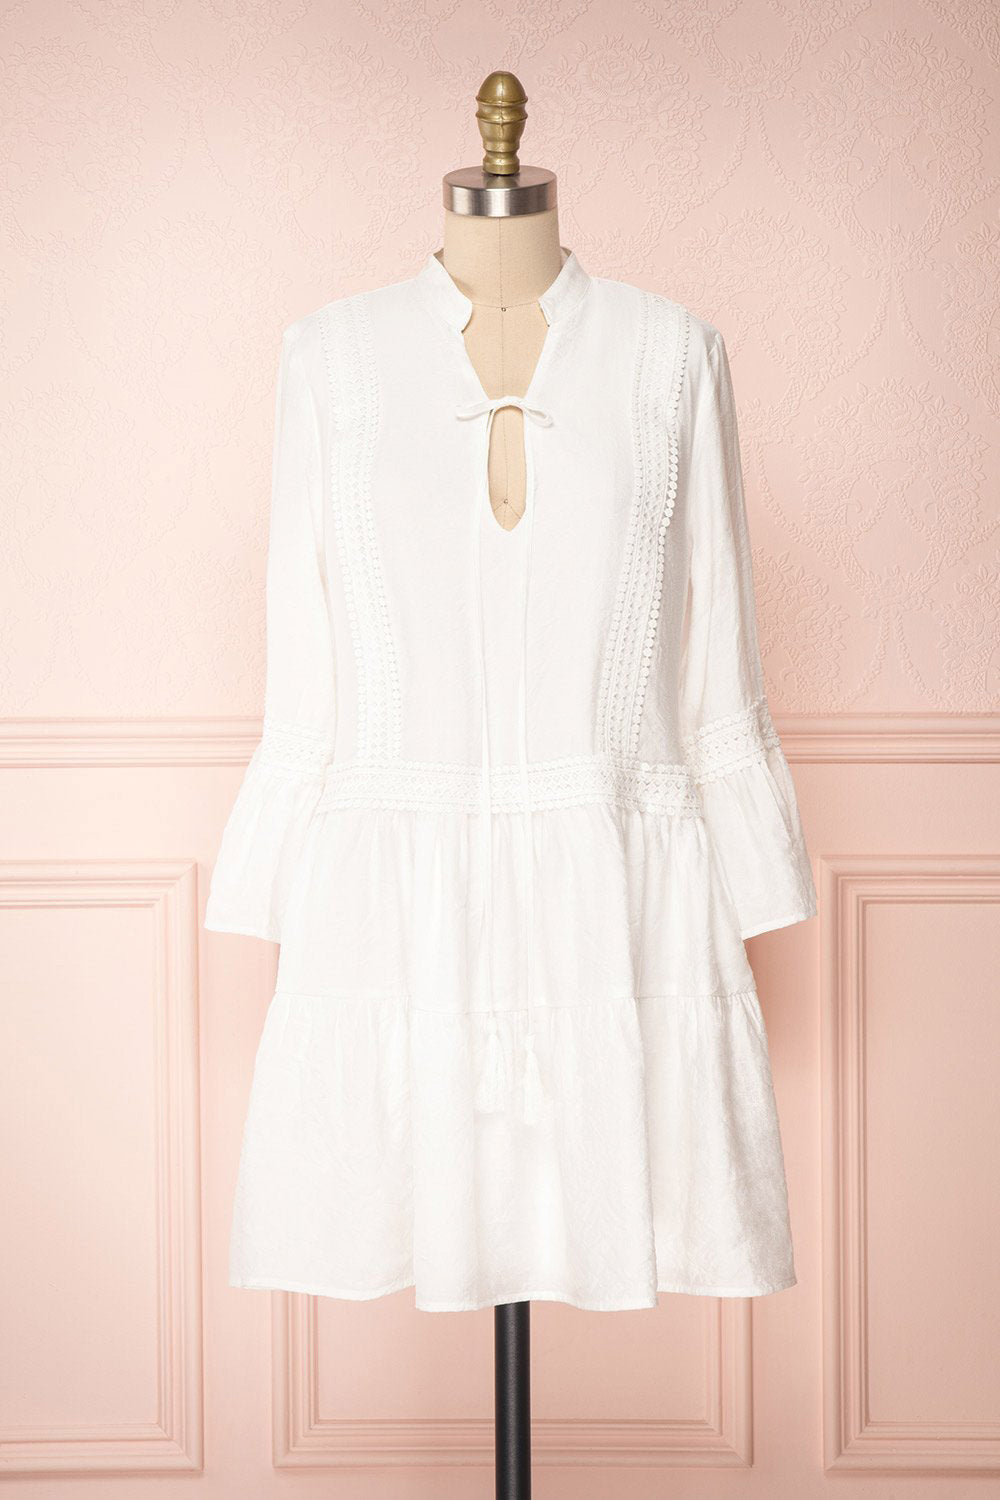 Makanui White Tunic Dress w/ Bell Sleeves | Boutique 1861